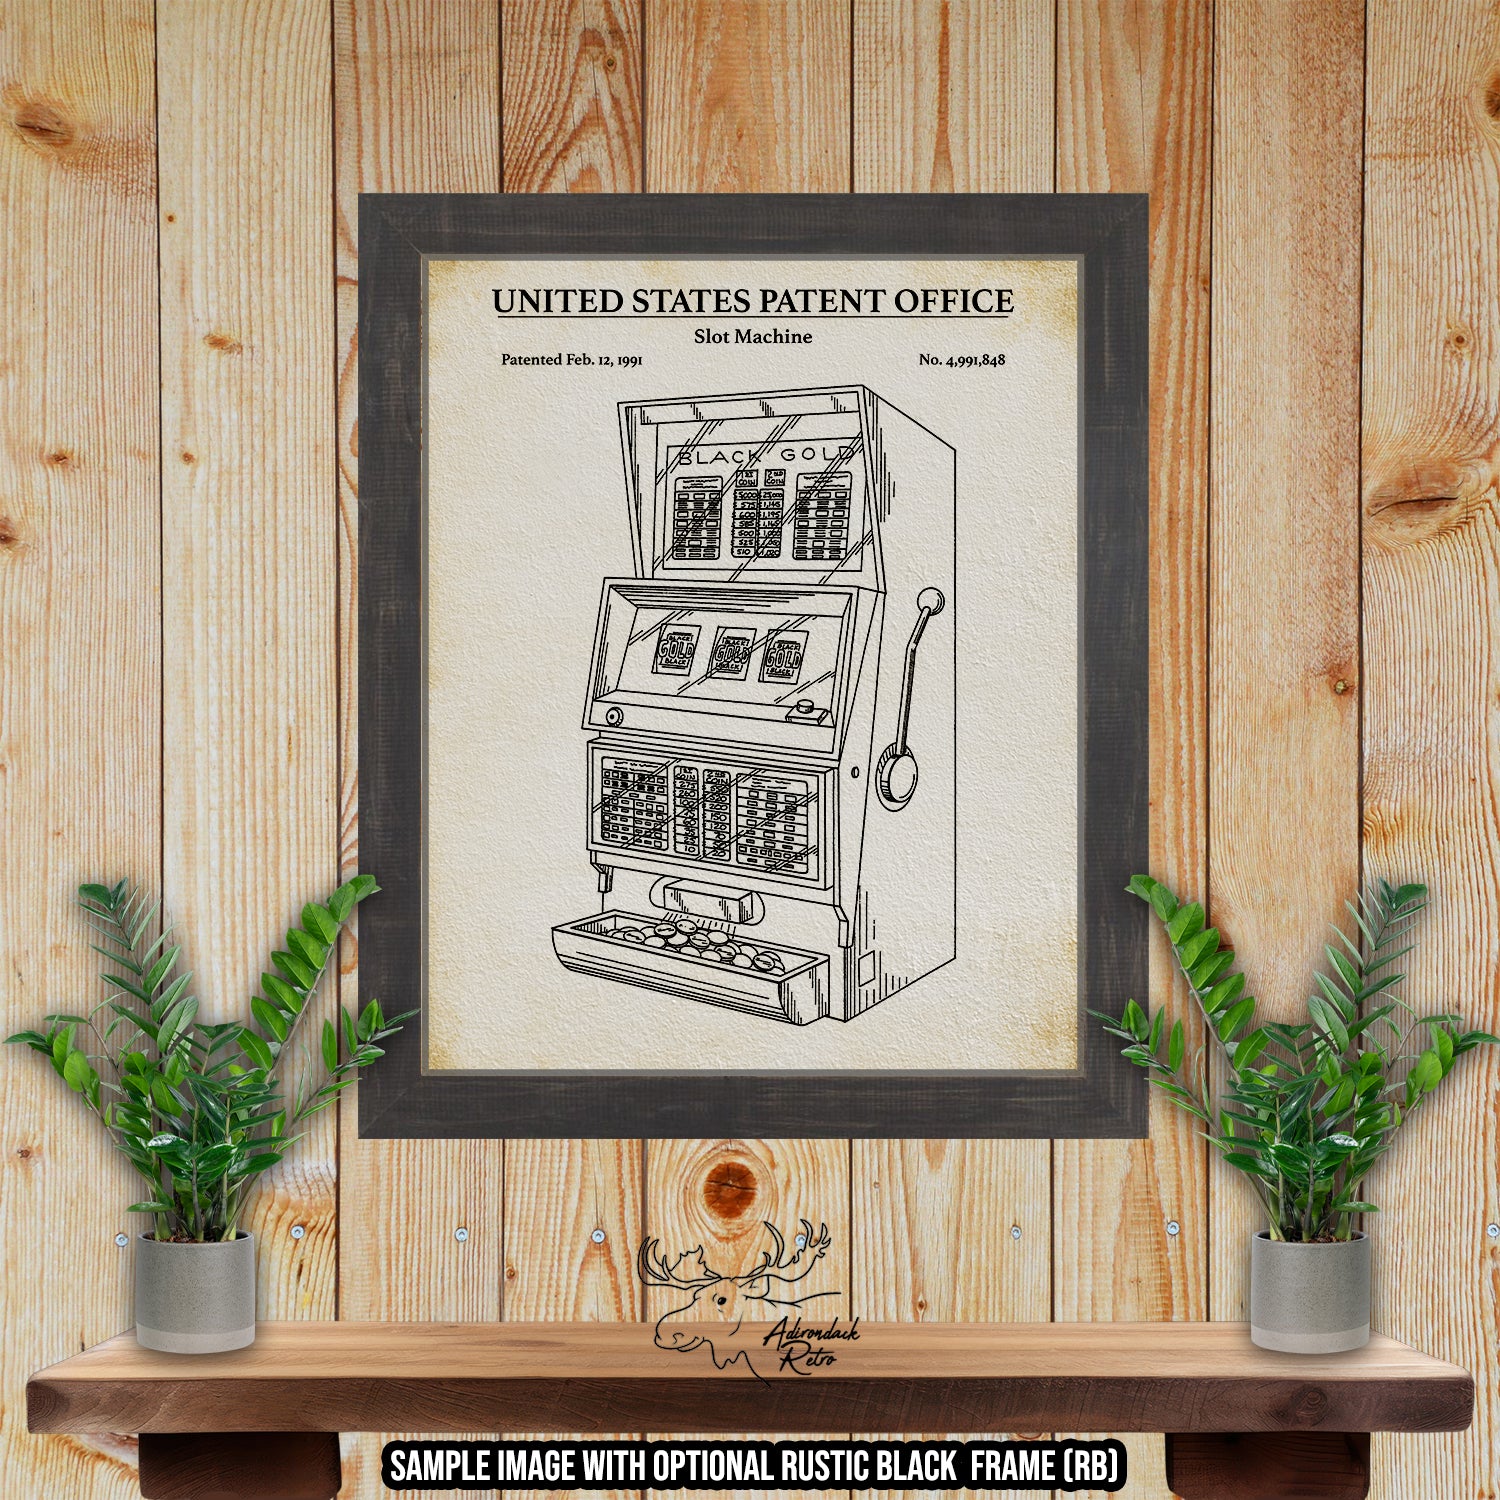 a drawing of a vending machine on a wooden wall